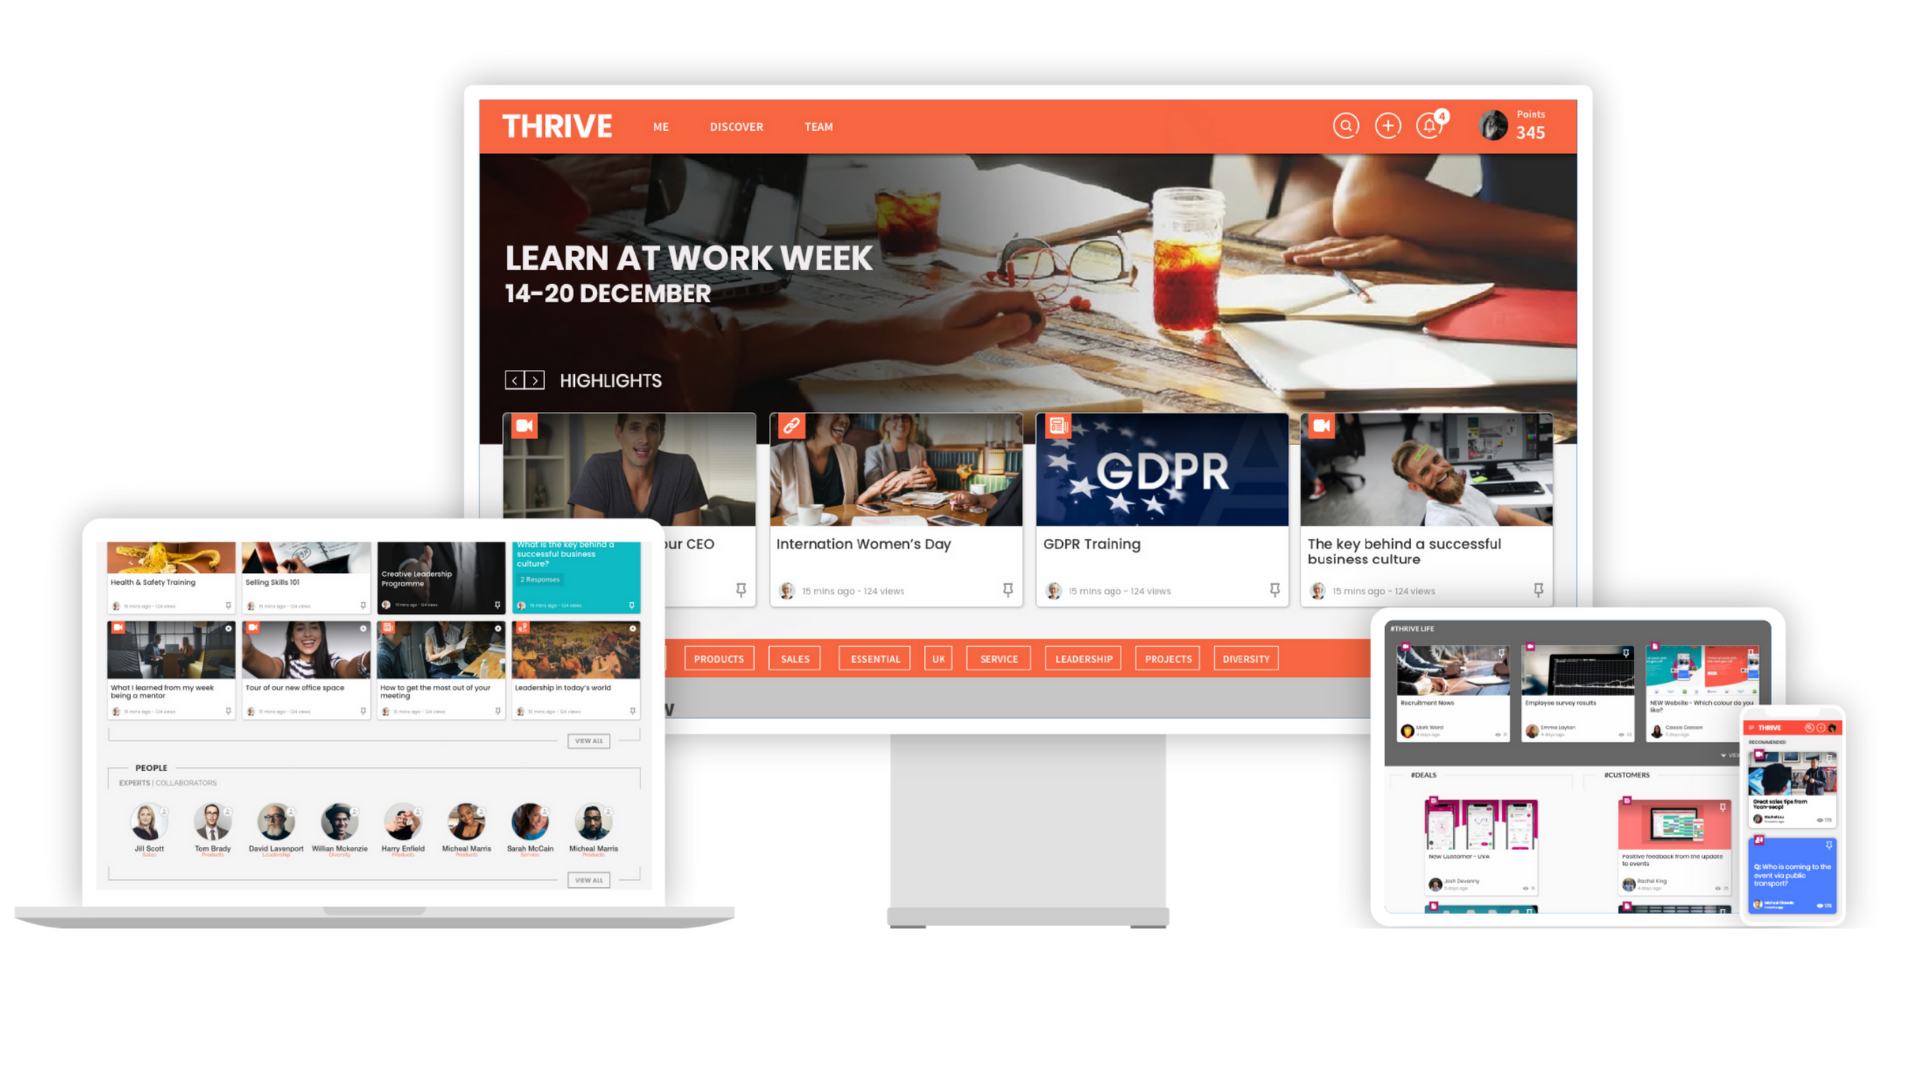 THRIVE extend LMS converter tool following successful migration of 12,000 learners IWG - News